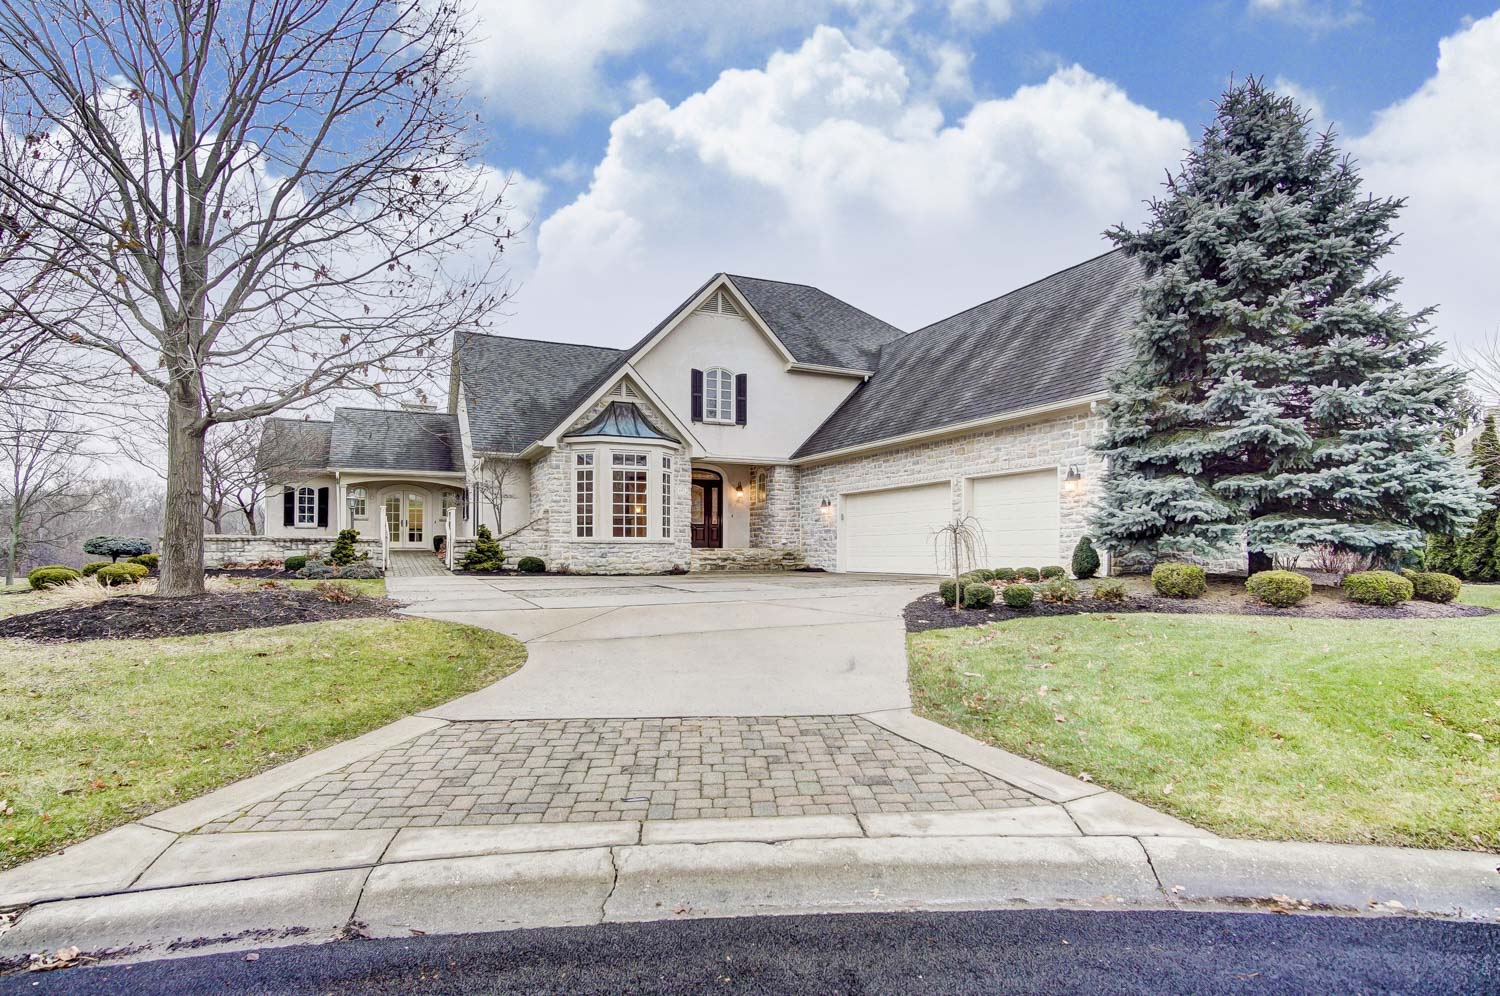 We market Luxury Homes throughout central Ohio